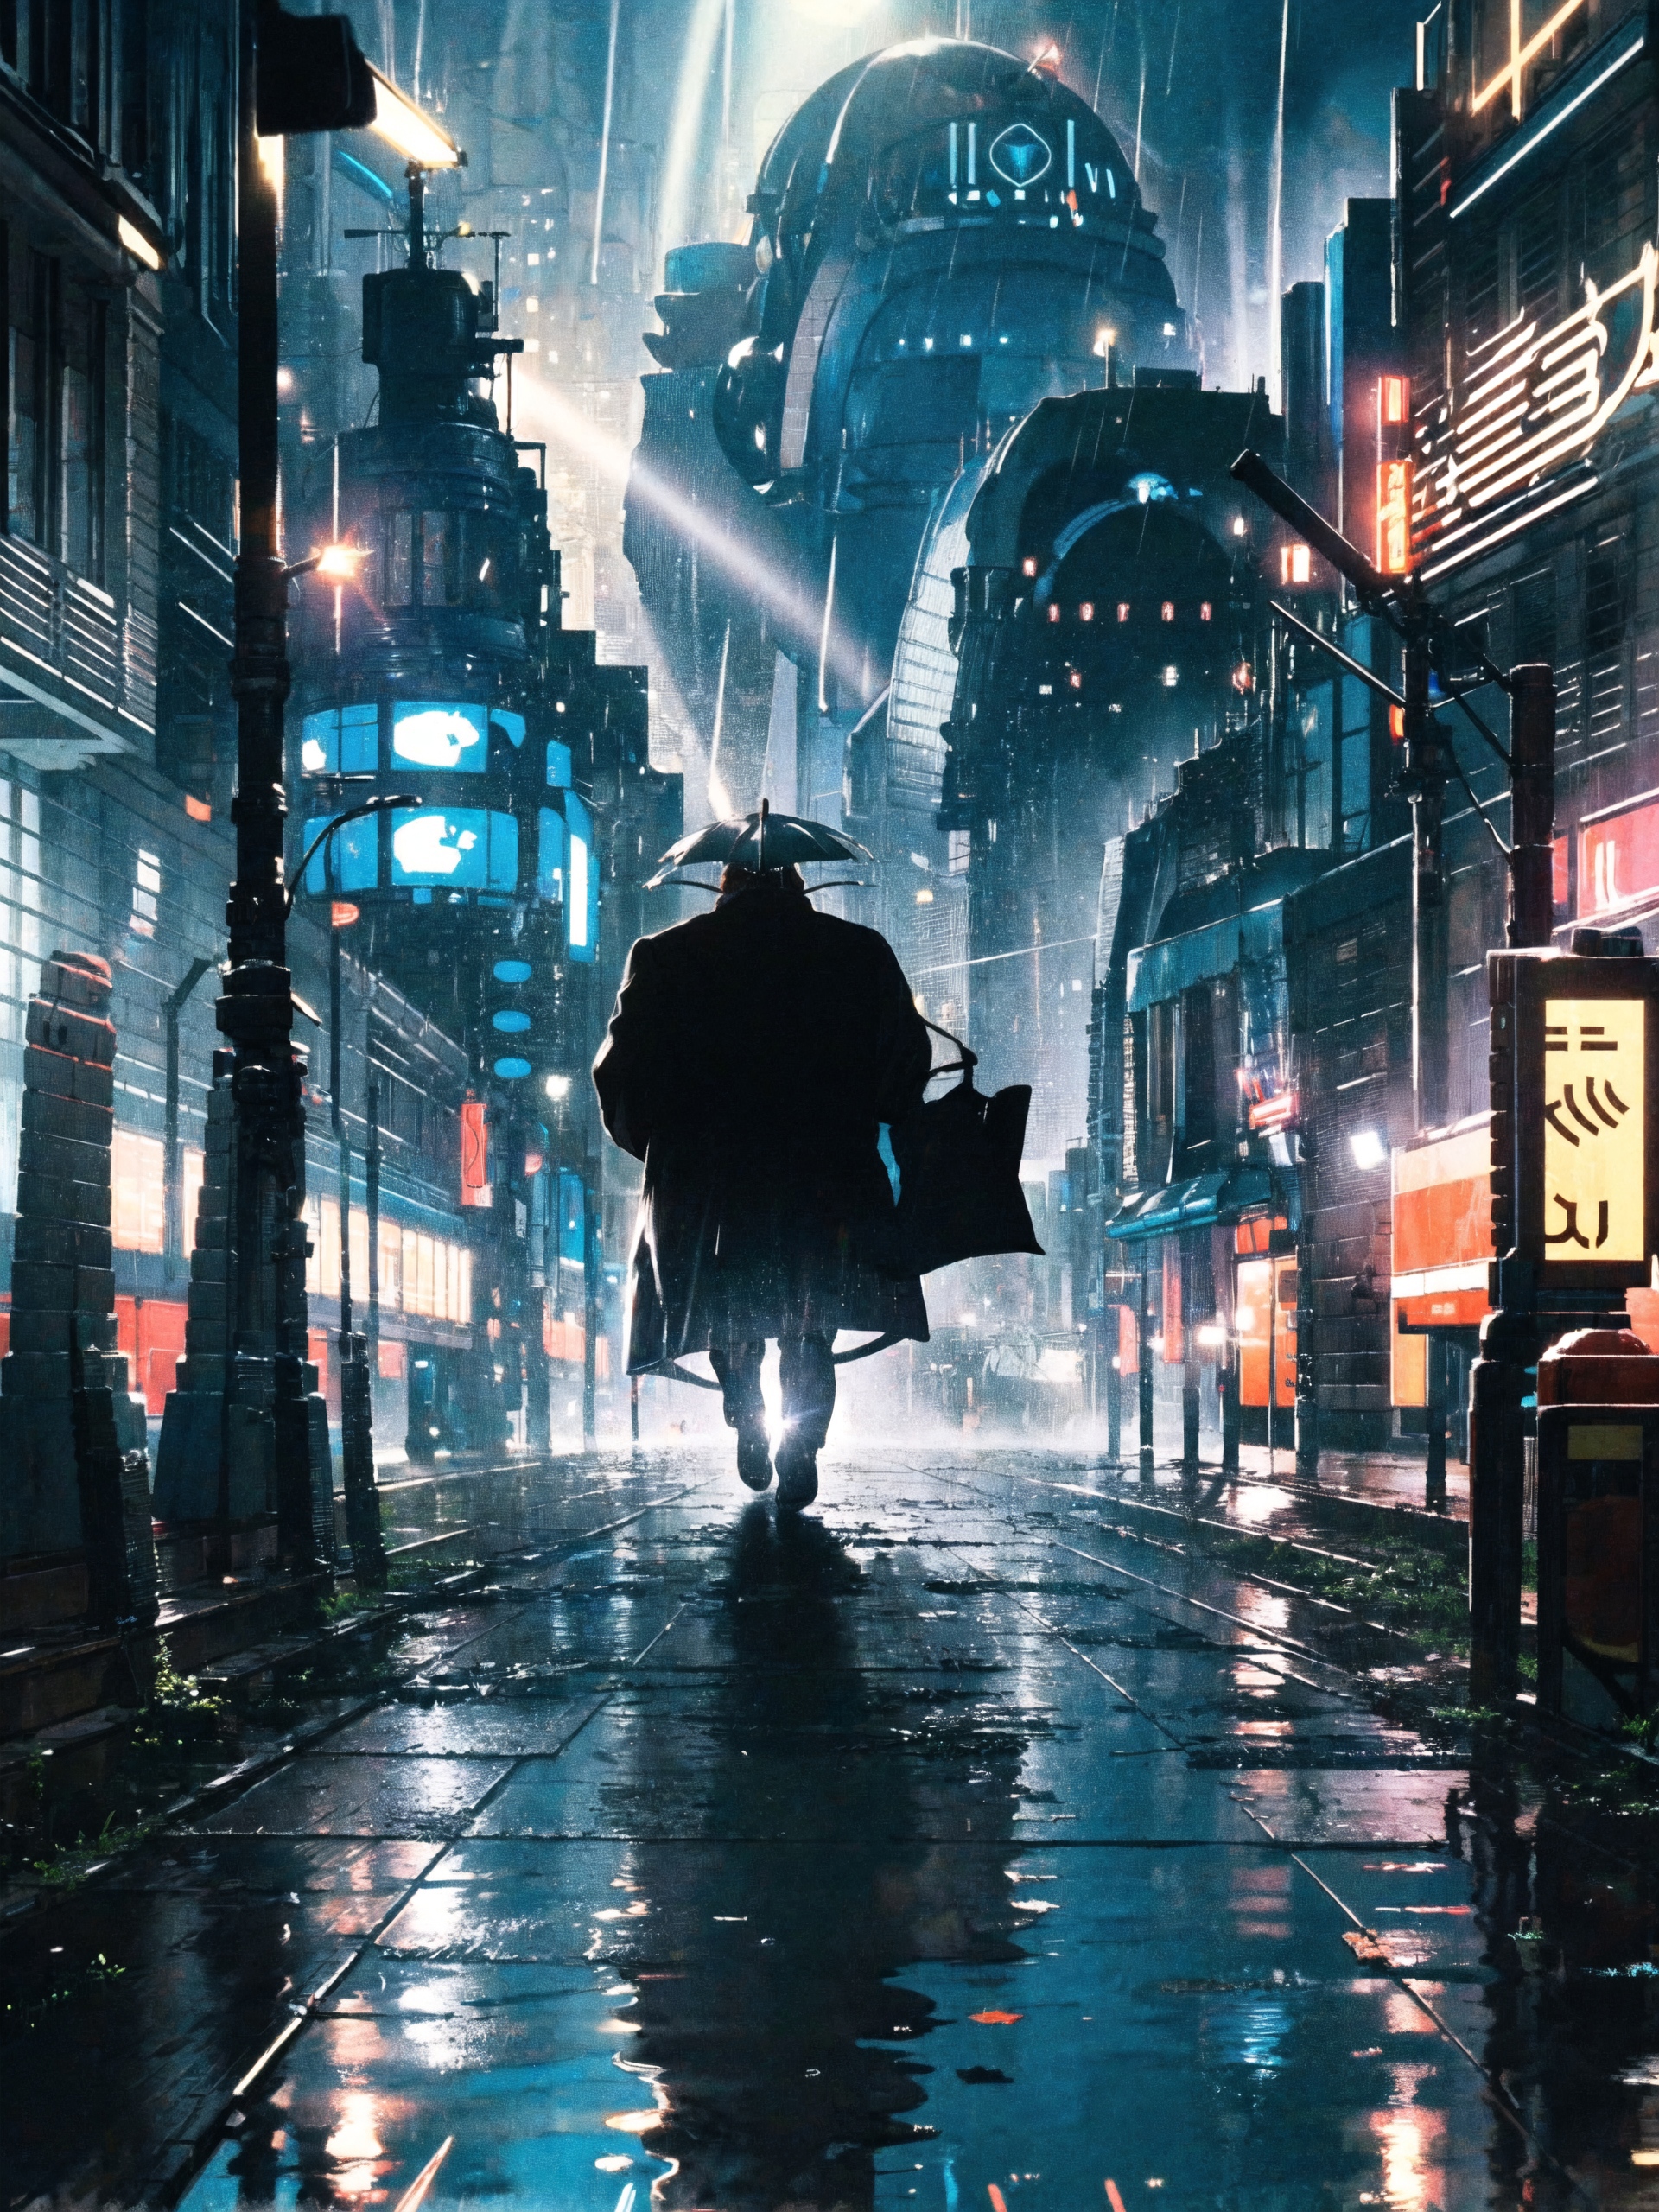 Blade Runner (1982 style) image by PotatCat